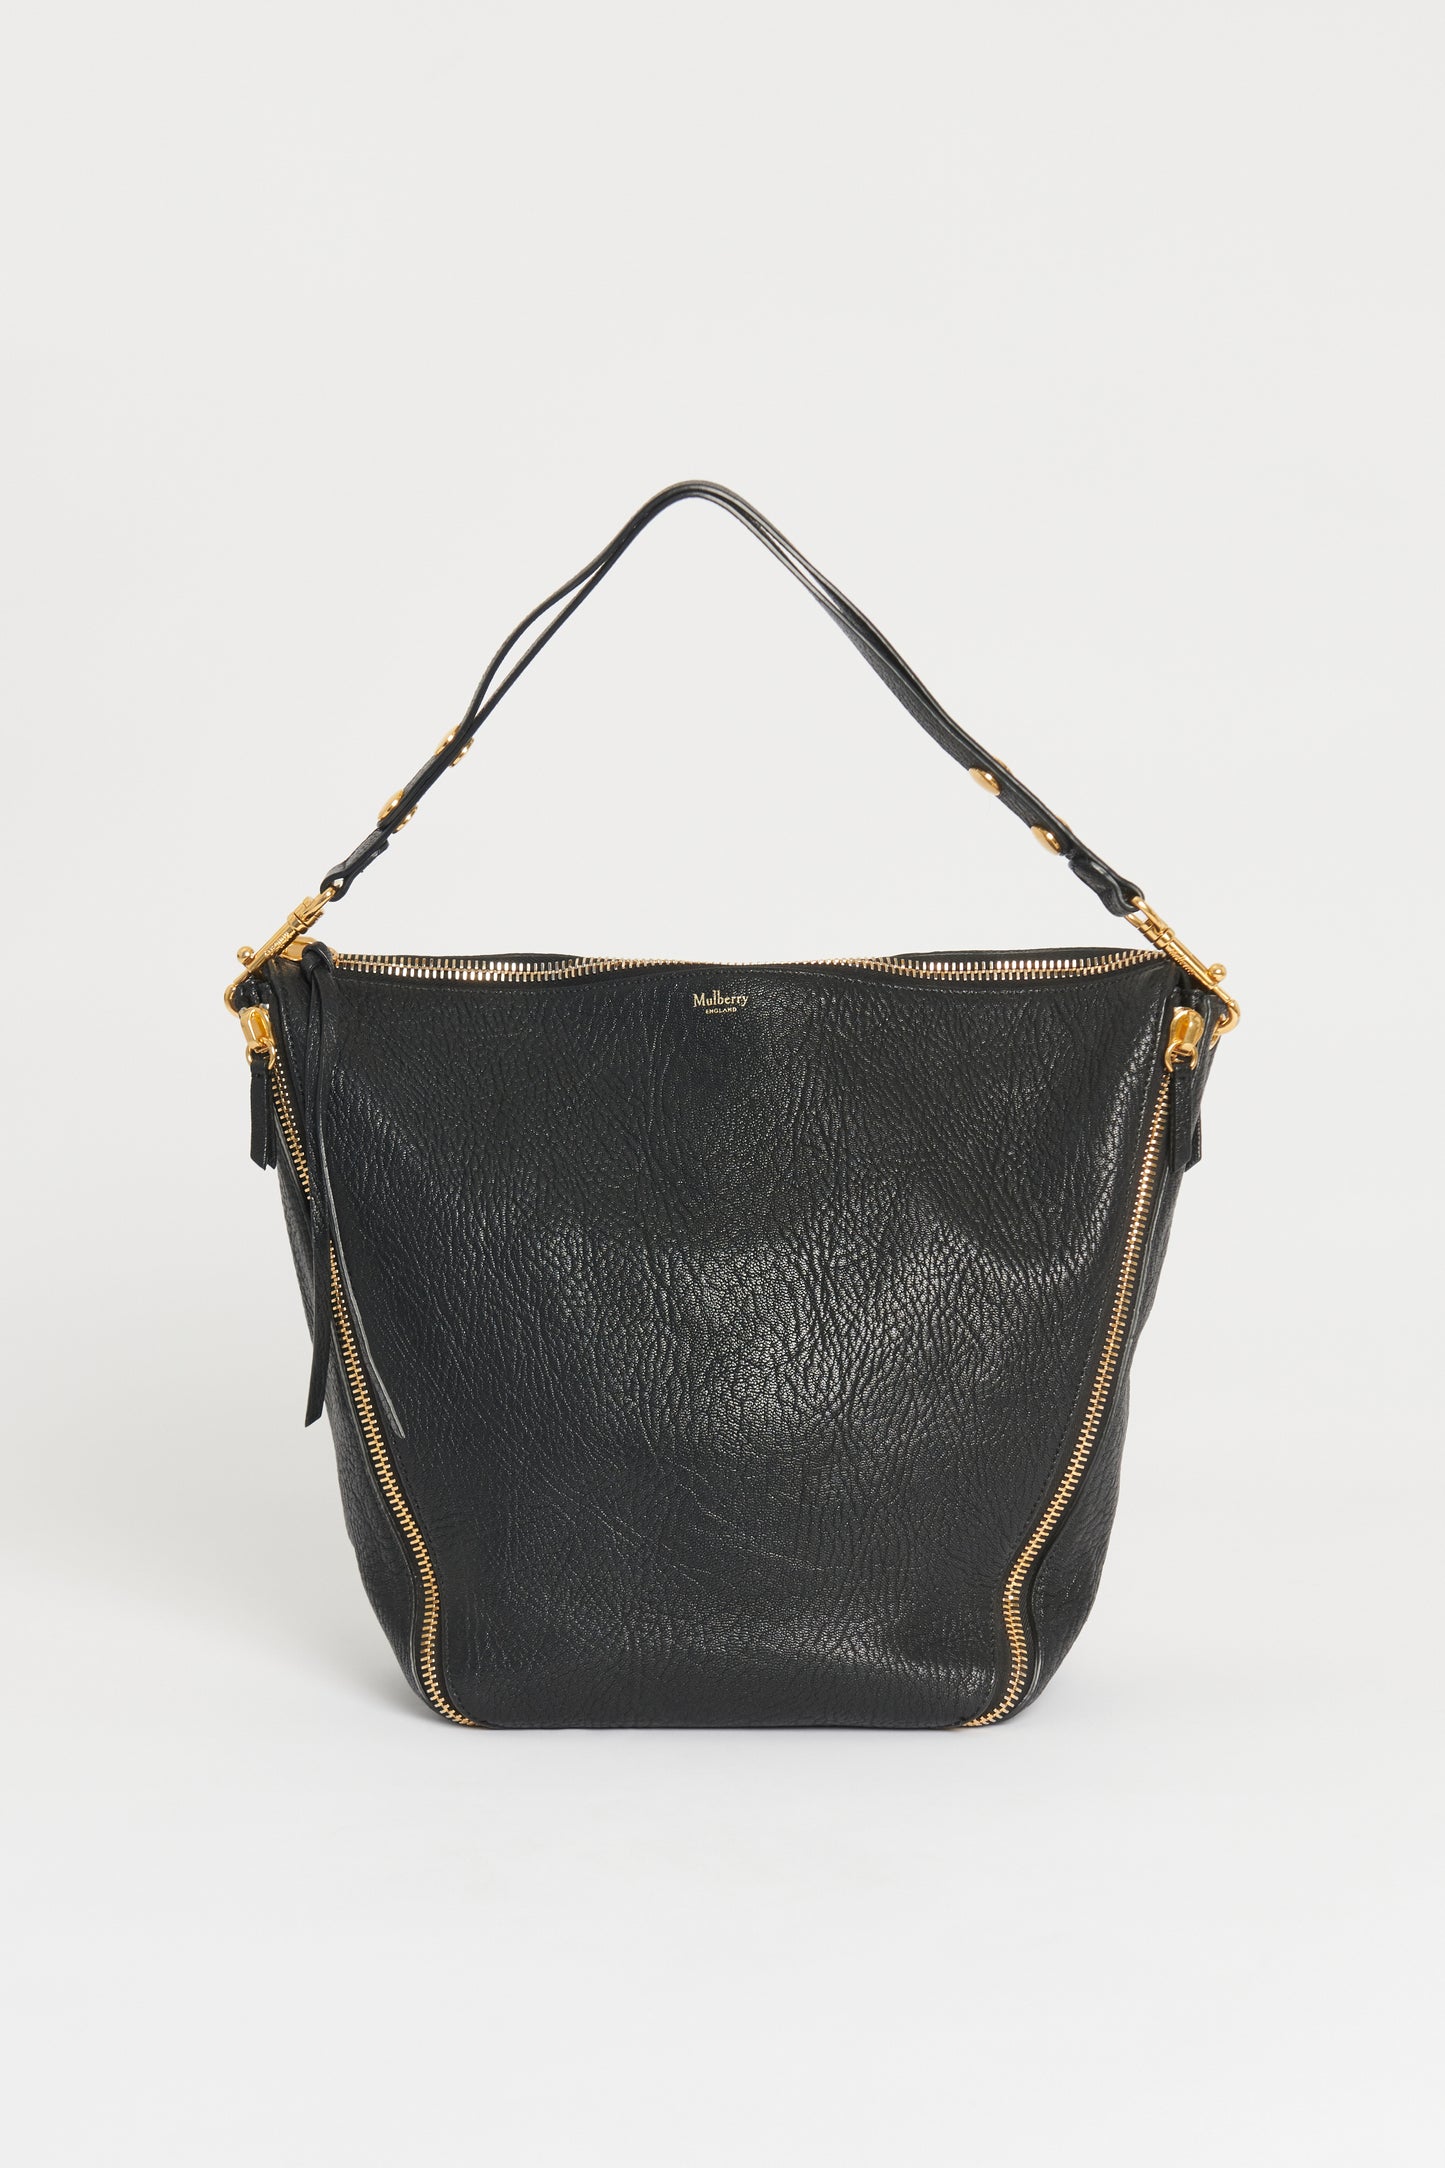 Black Grained Leather Preowned Zipper Tote Bag